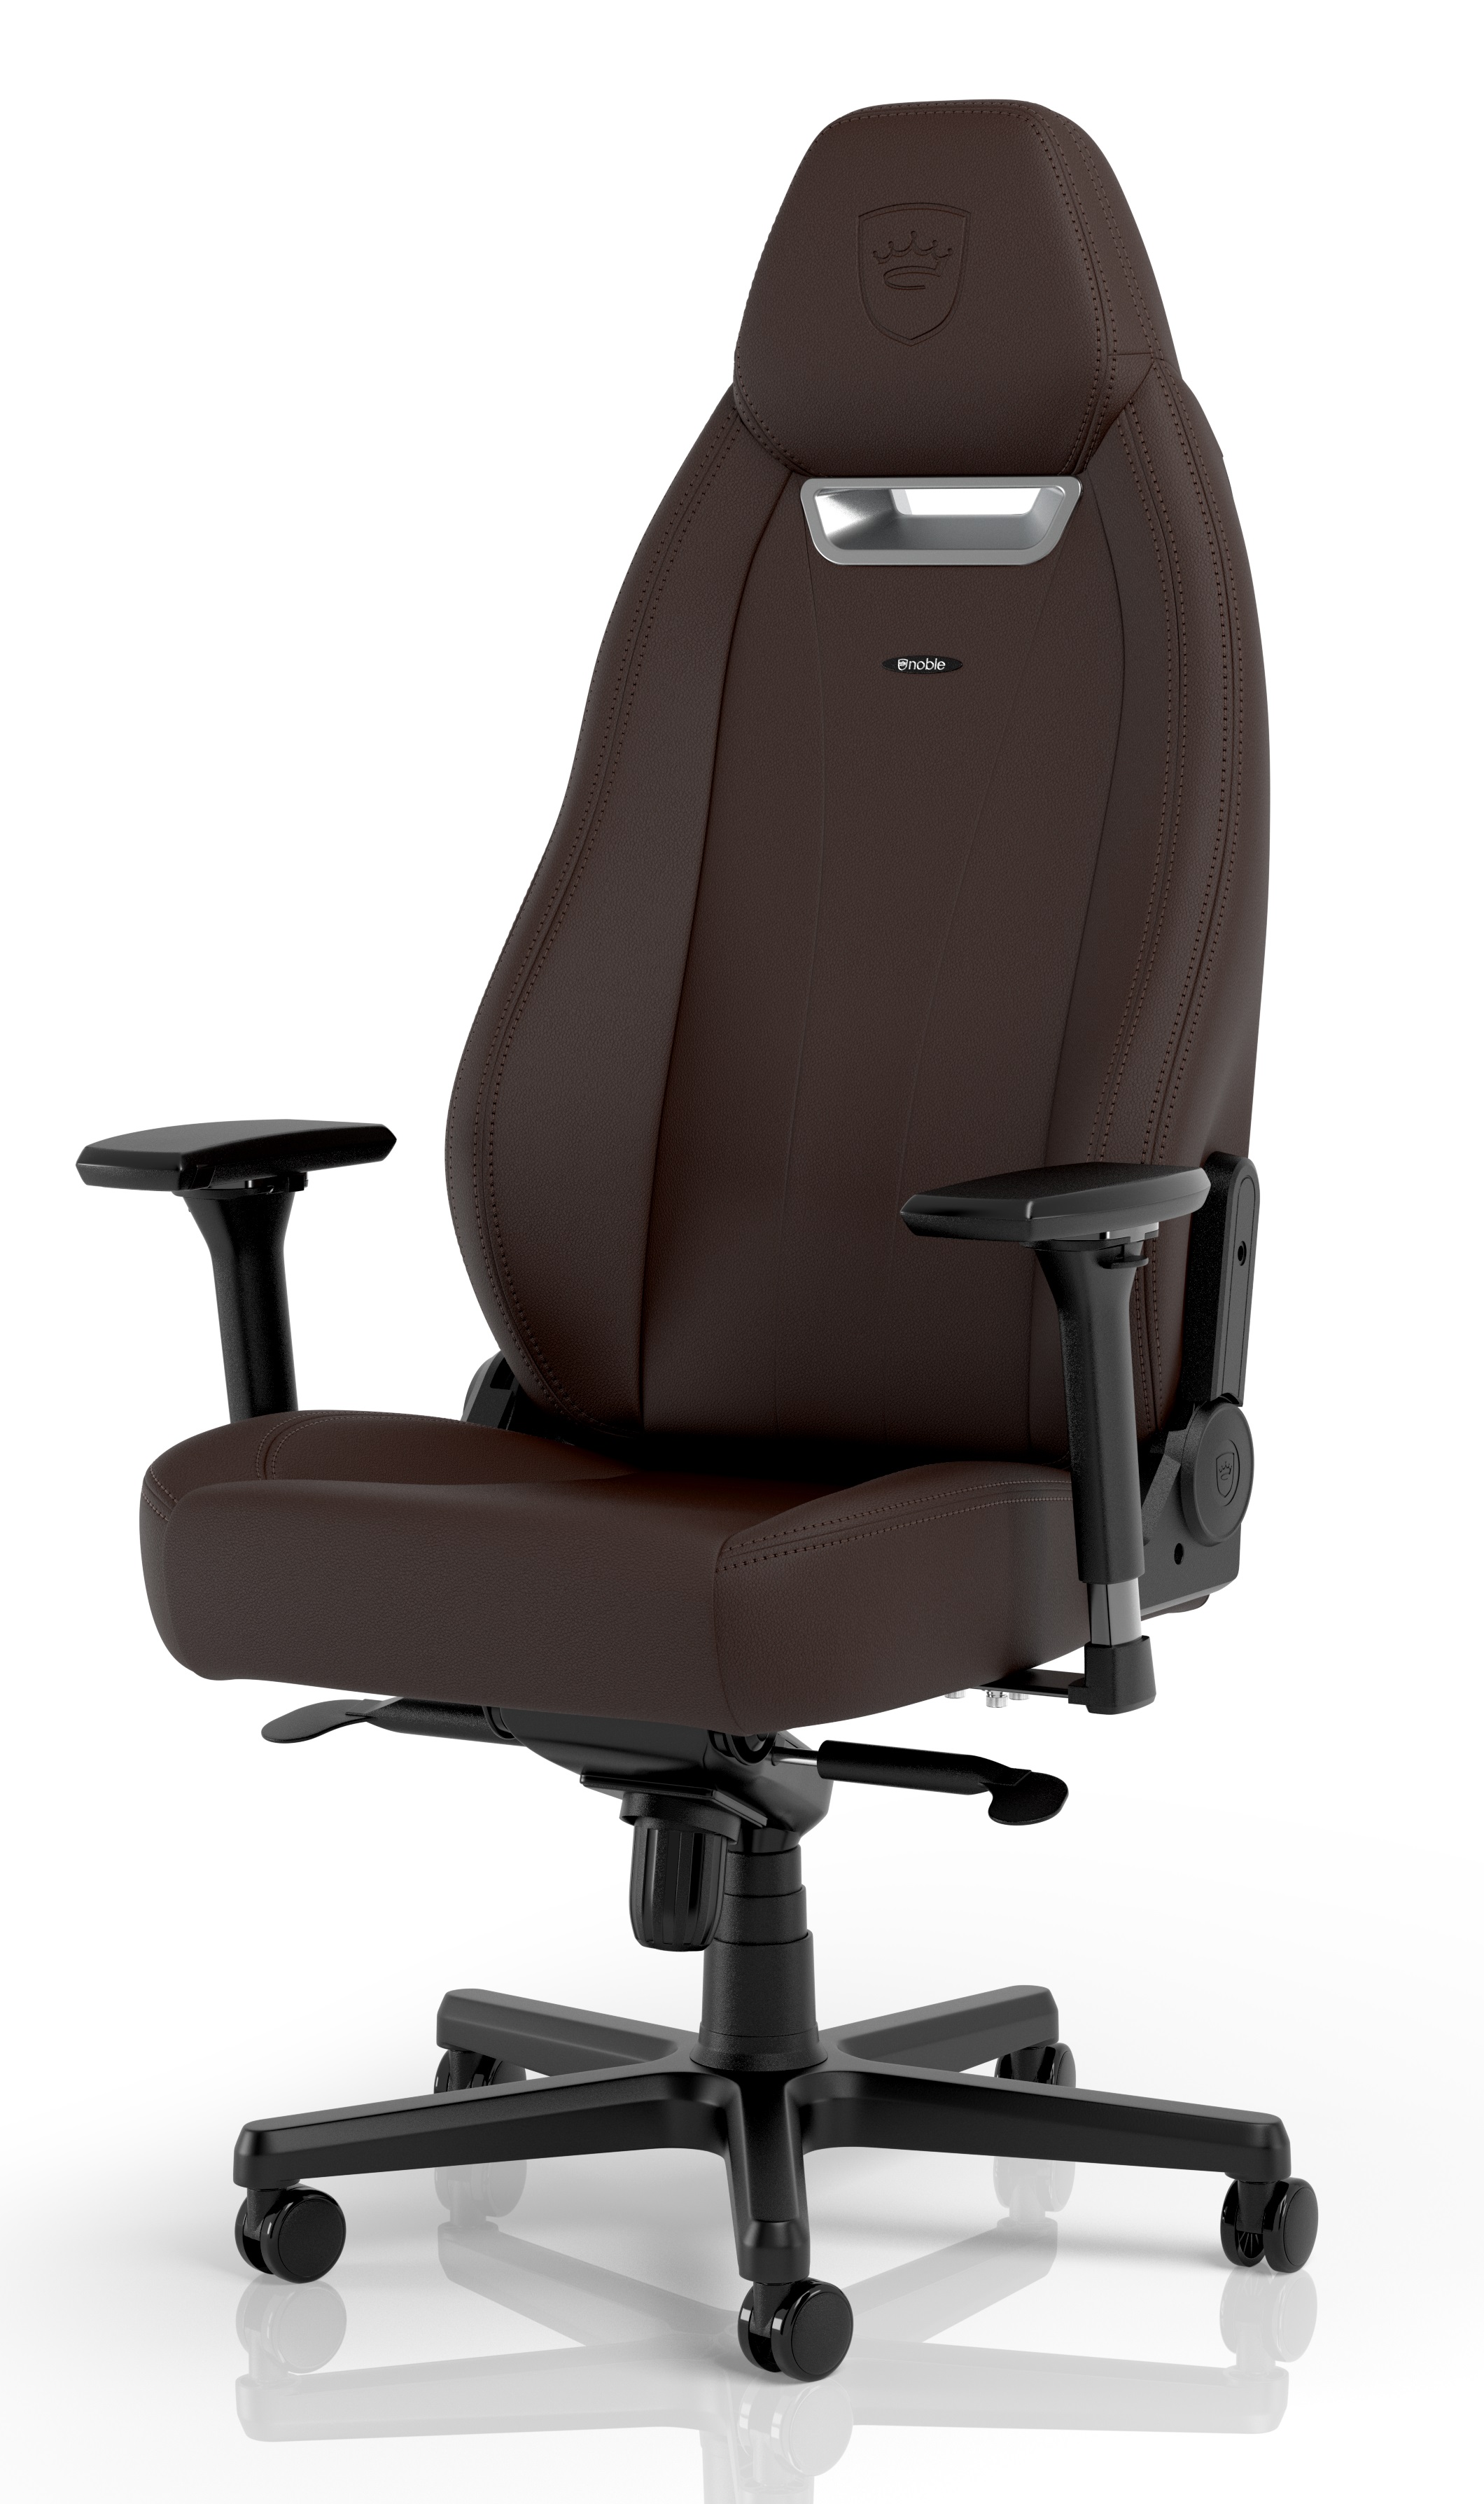 noblechairs LEGEND Gaming Chair Java Edition – High-tech PU Leather